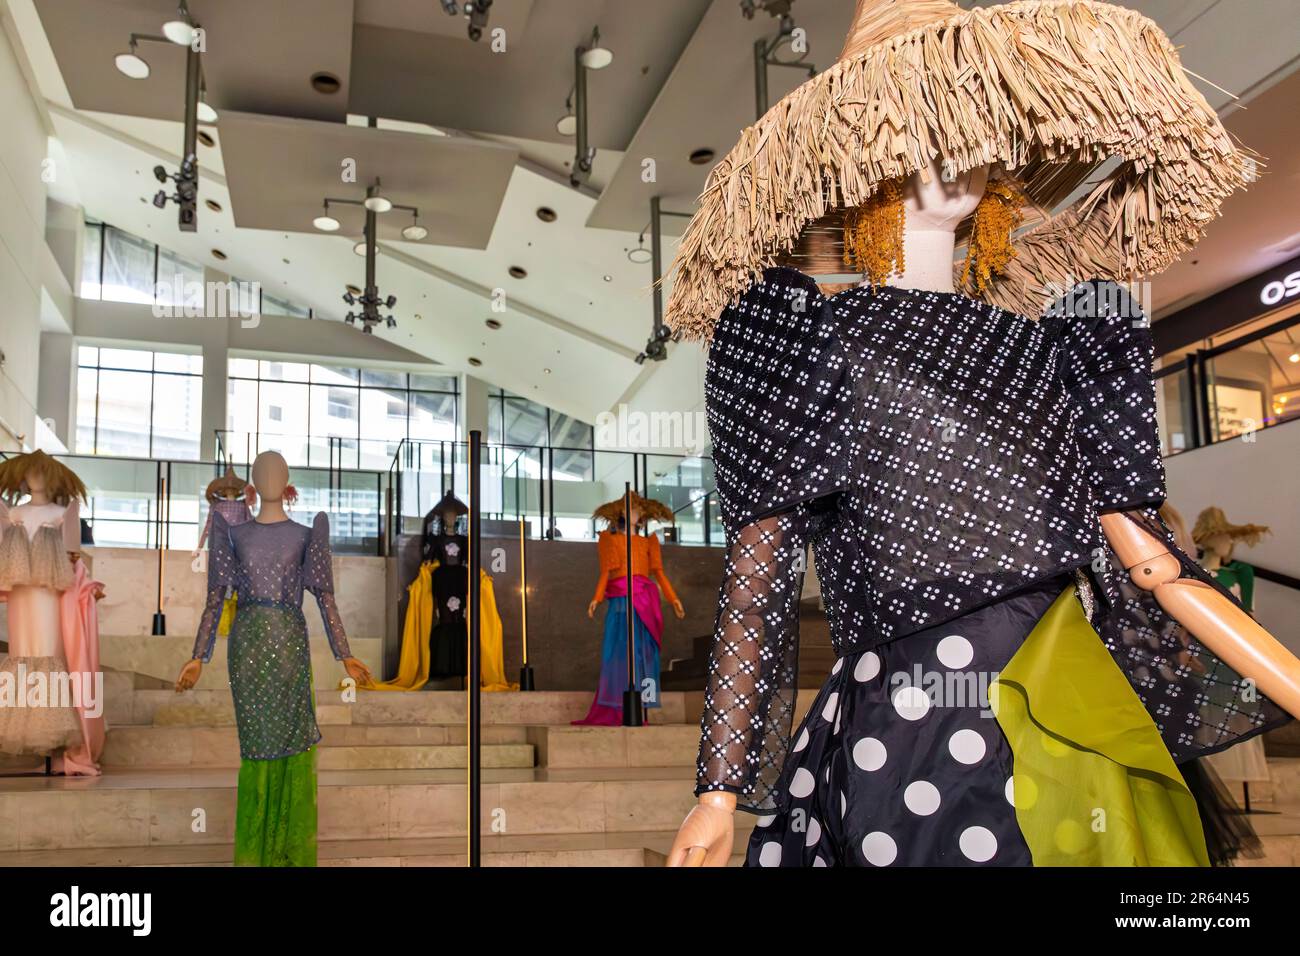 Fashion show mannequins on display in shopping mall, Makati, Manila, Philippines Stock Photo